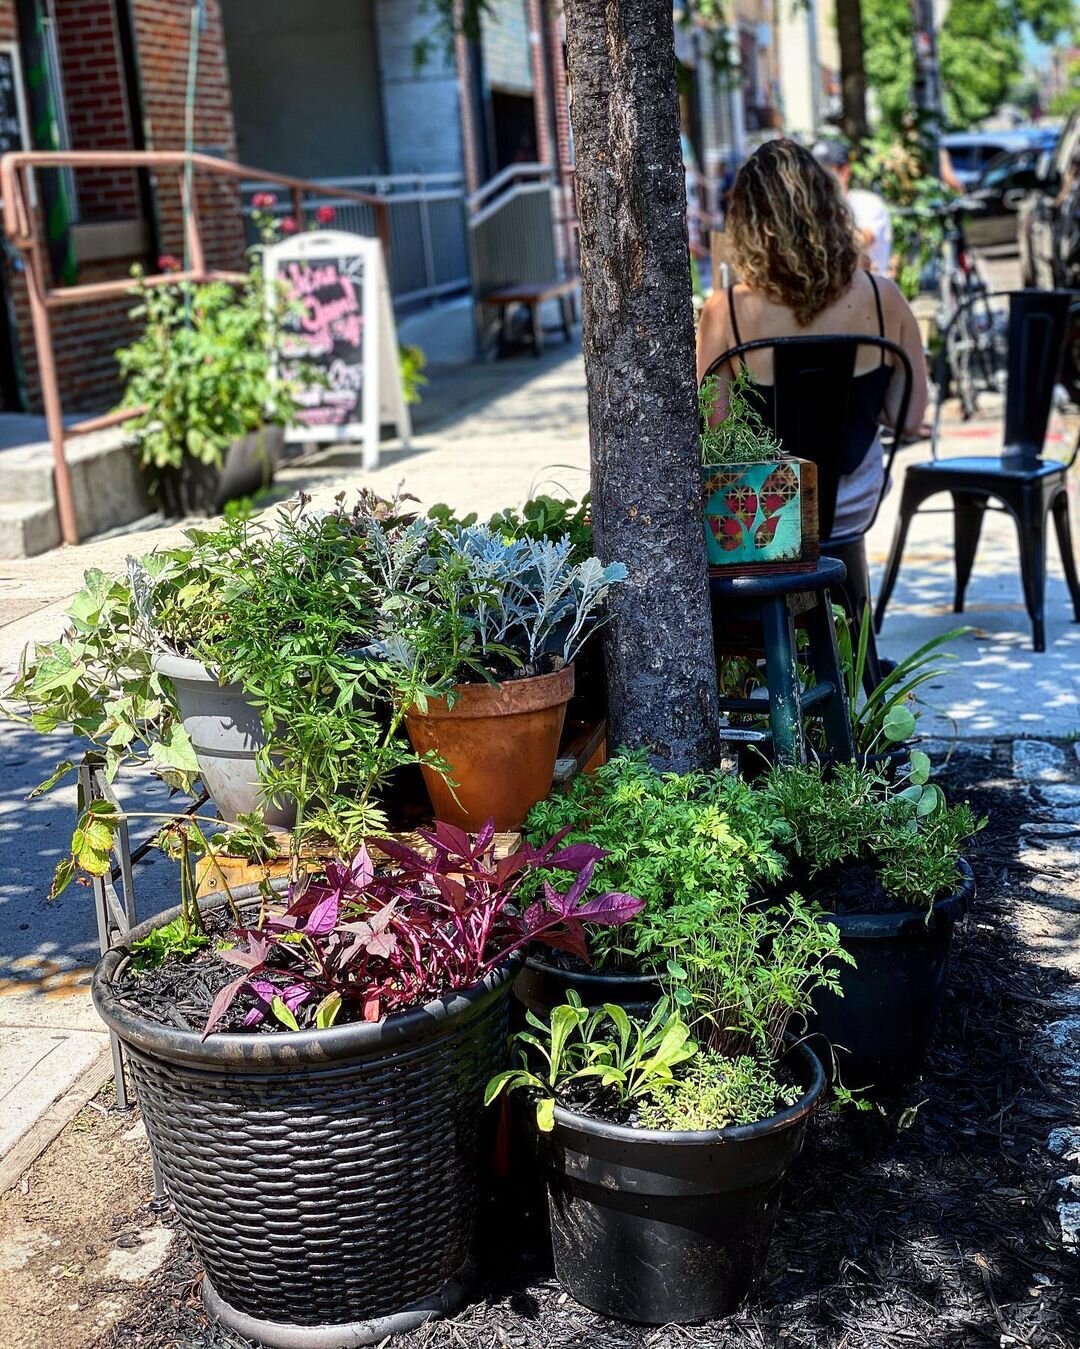 Reposted from @foodbabysoul: 

&ldquo;New Outdoor Seating @pitangabk&hellip;

Big ups to the businesses I support with #guerrillagardening and the gorgeous neighbors bringing it together with pots, plants, mulch, water, and soil.&rdquo;